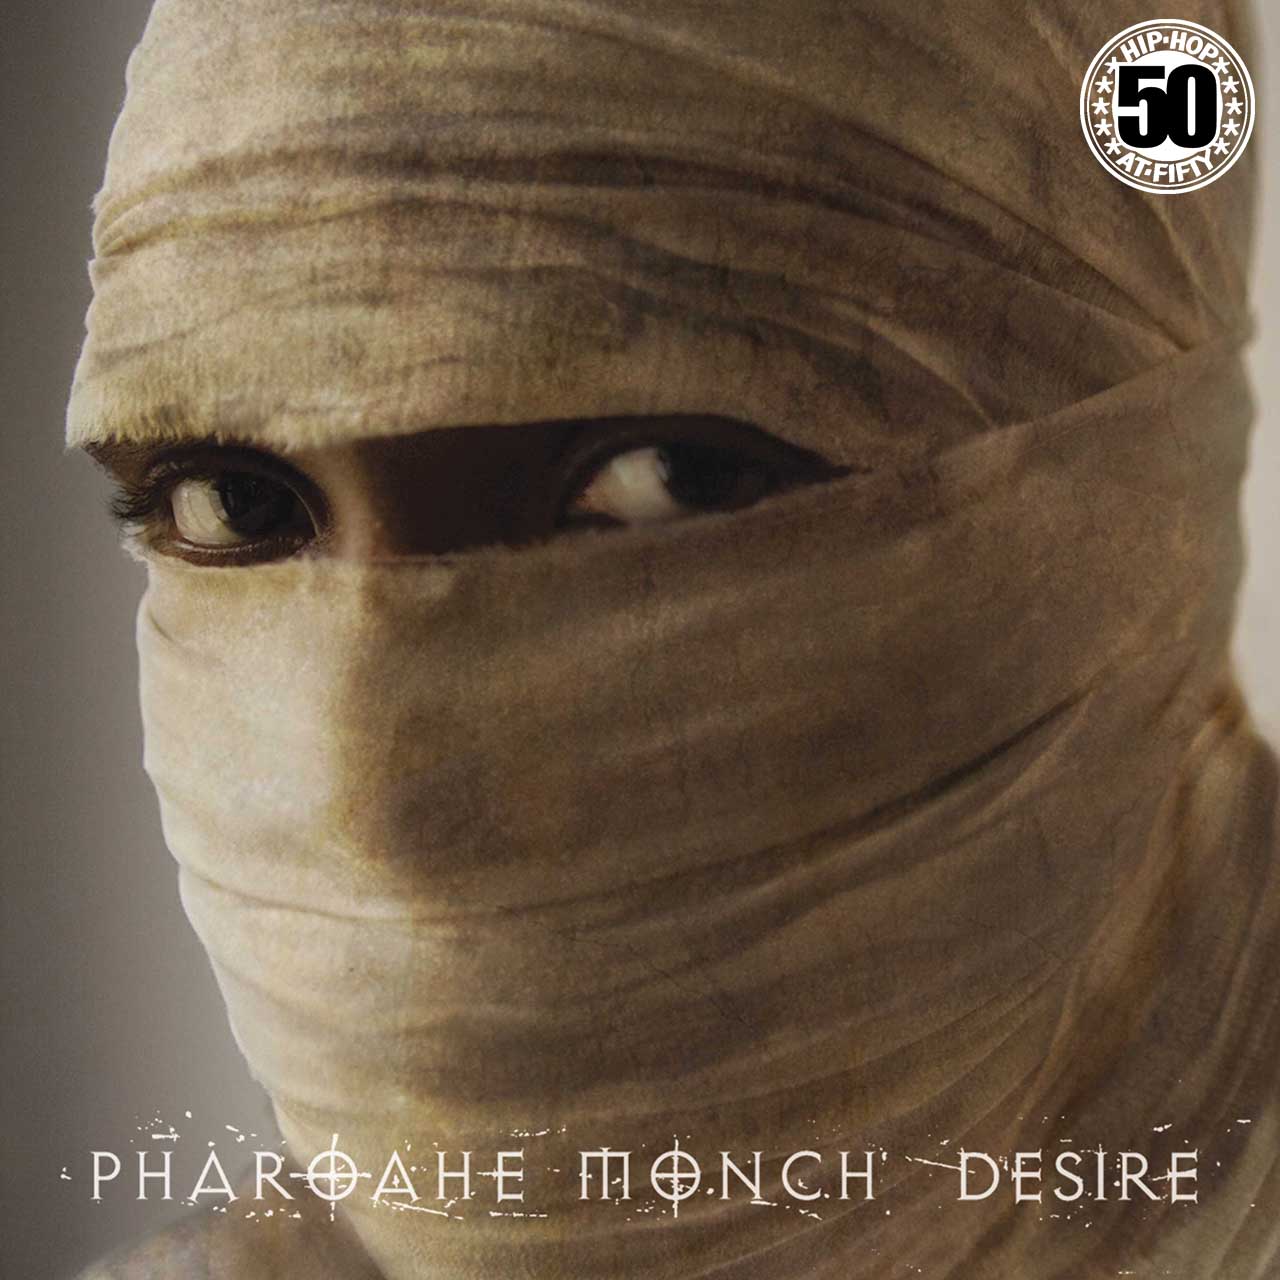 Pharoahe Monch - Simon Says (Extended Version) (Feat. Various Artists) 